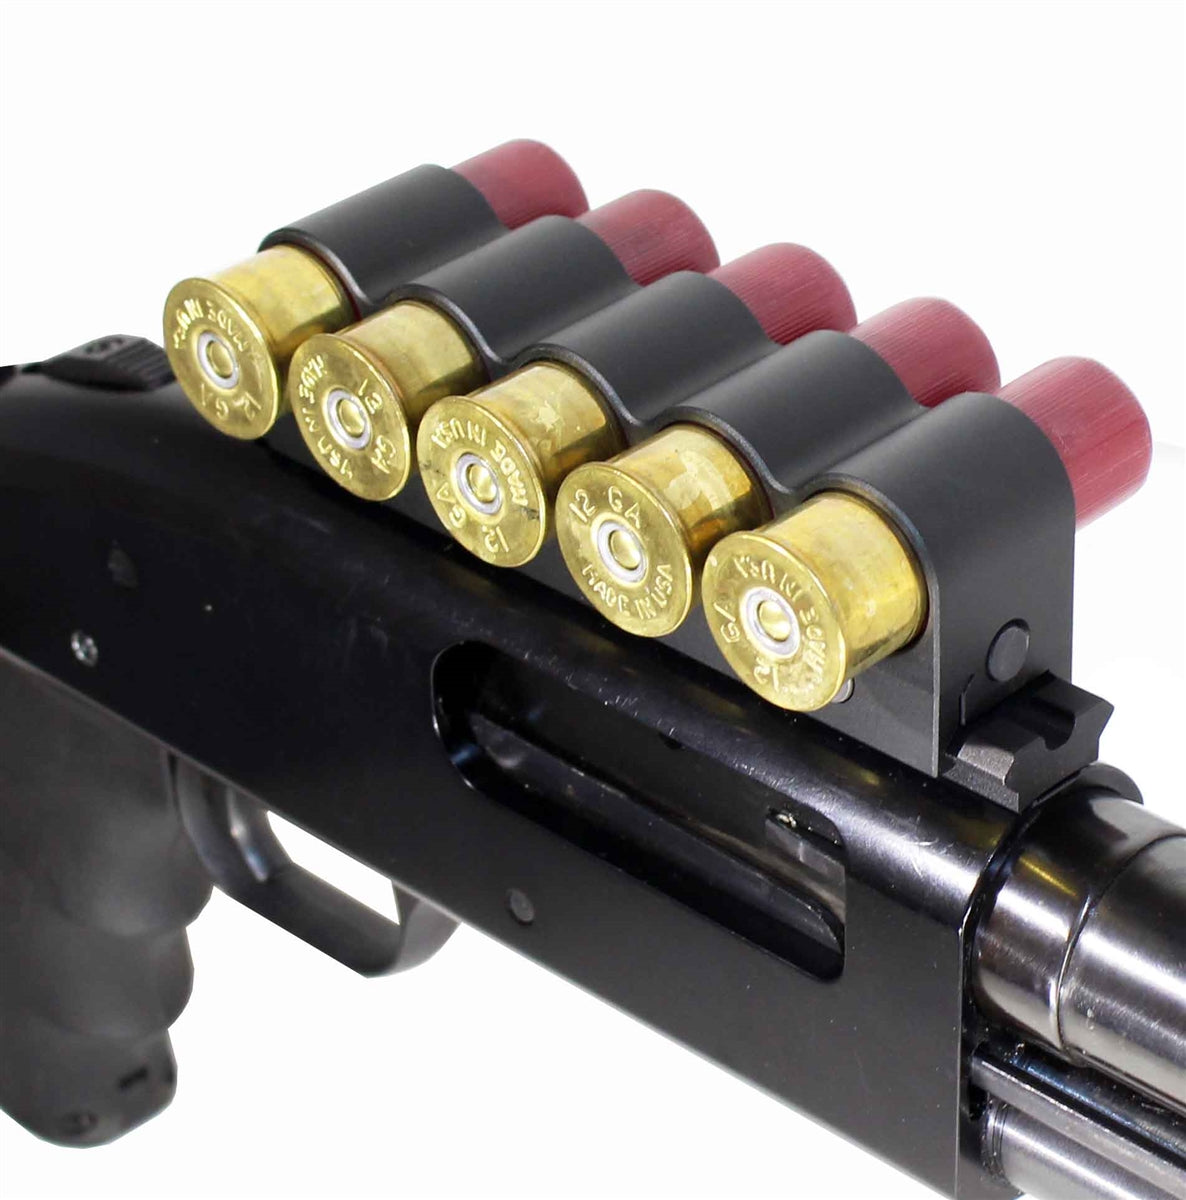 Trinity Tactical Aluminum Shell Holder With Base Mount For Mossberg 500 12 Gauge Pump.